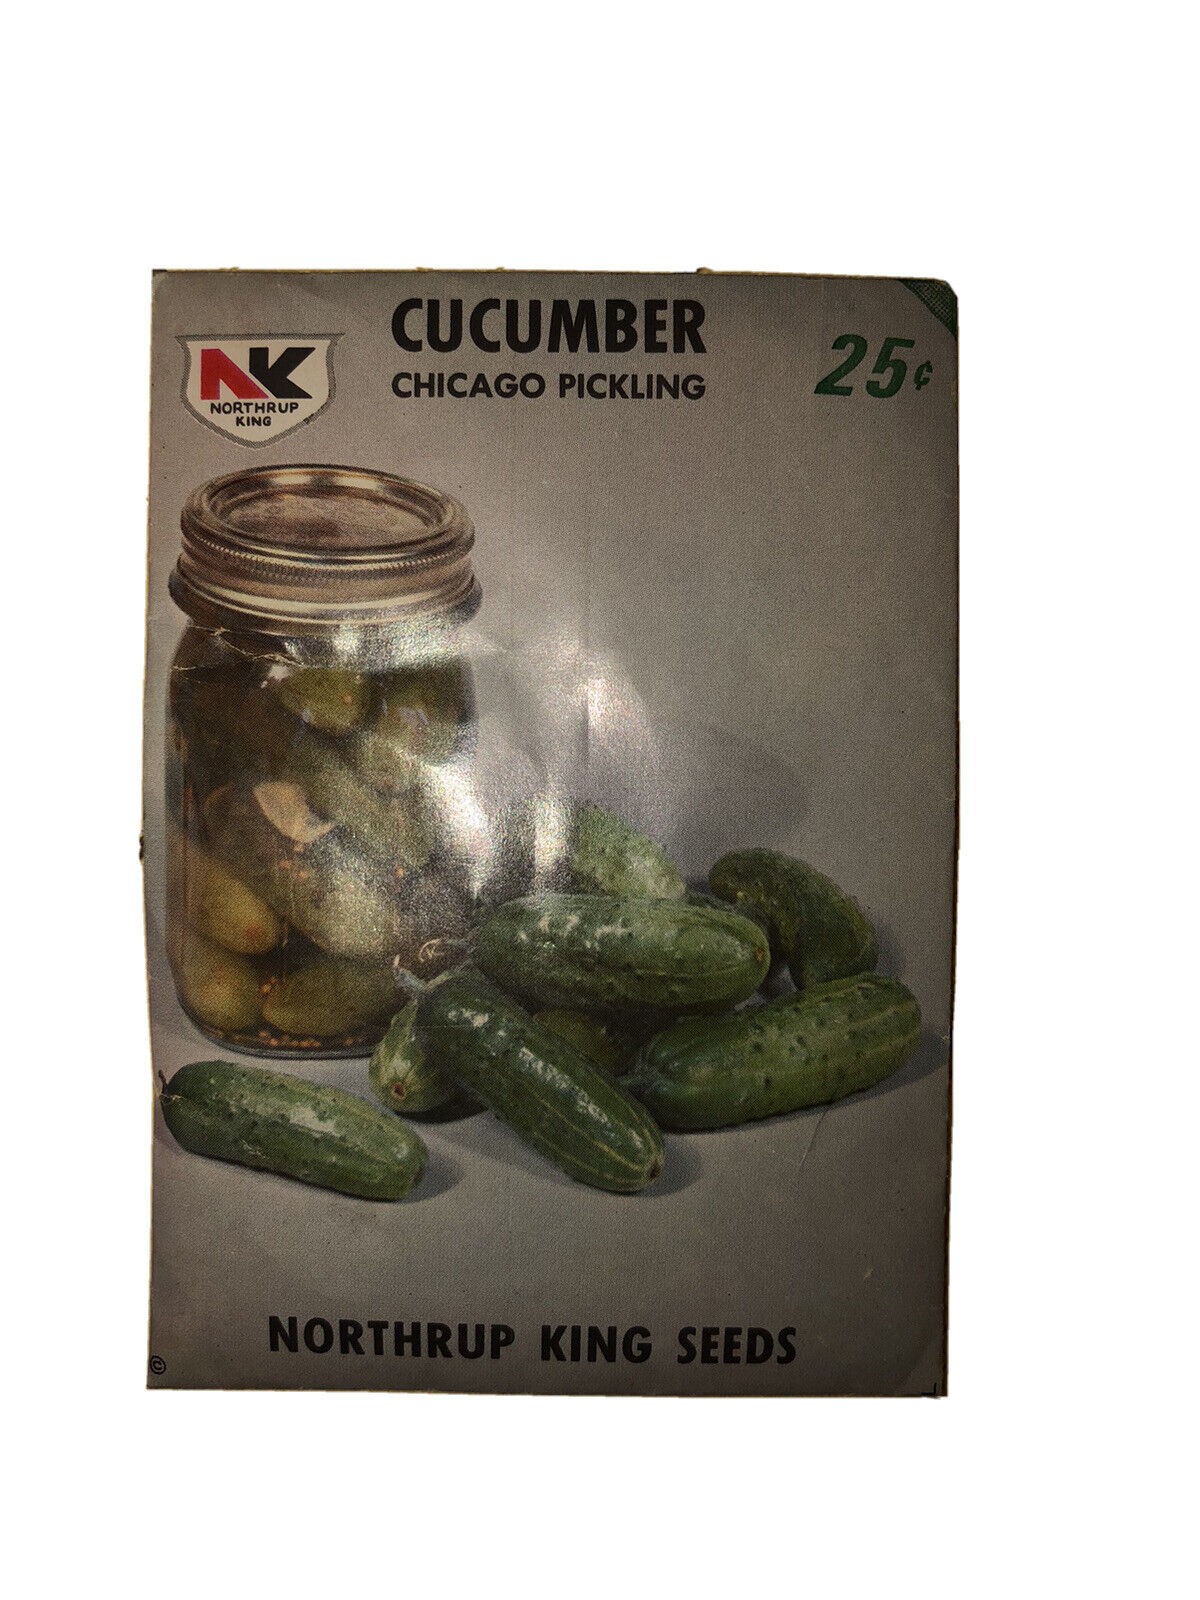 *Sealed* 1970 Northrup, King & Co. Cucumber Chicago Pickling Seed Pack